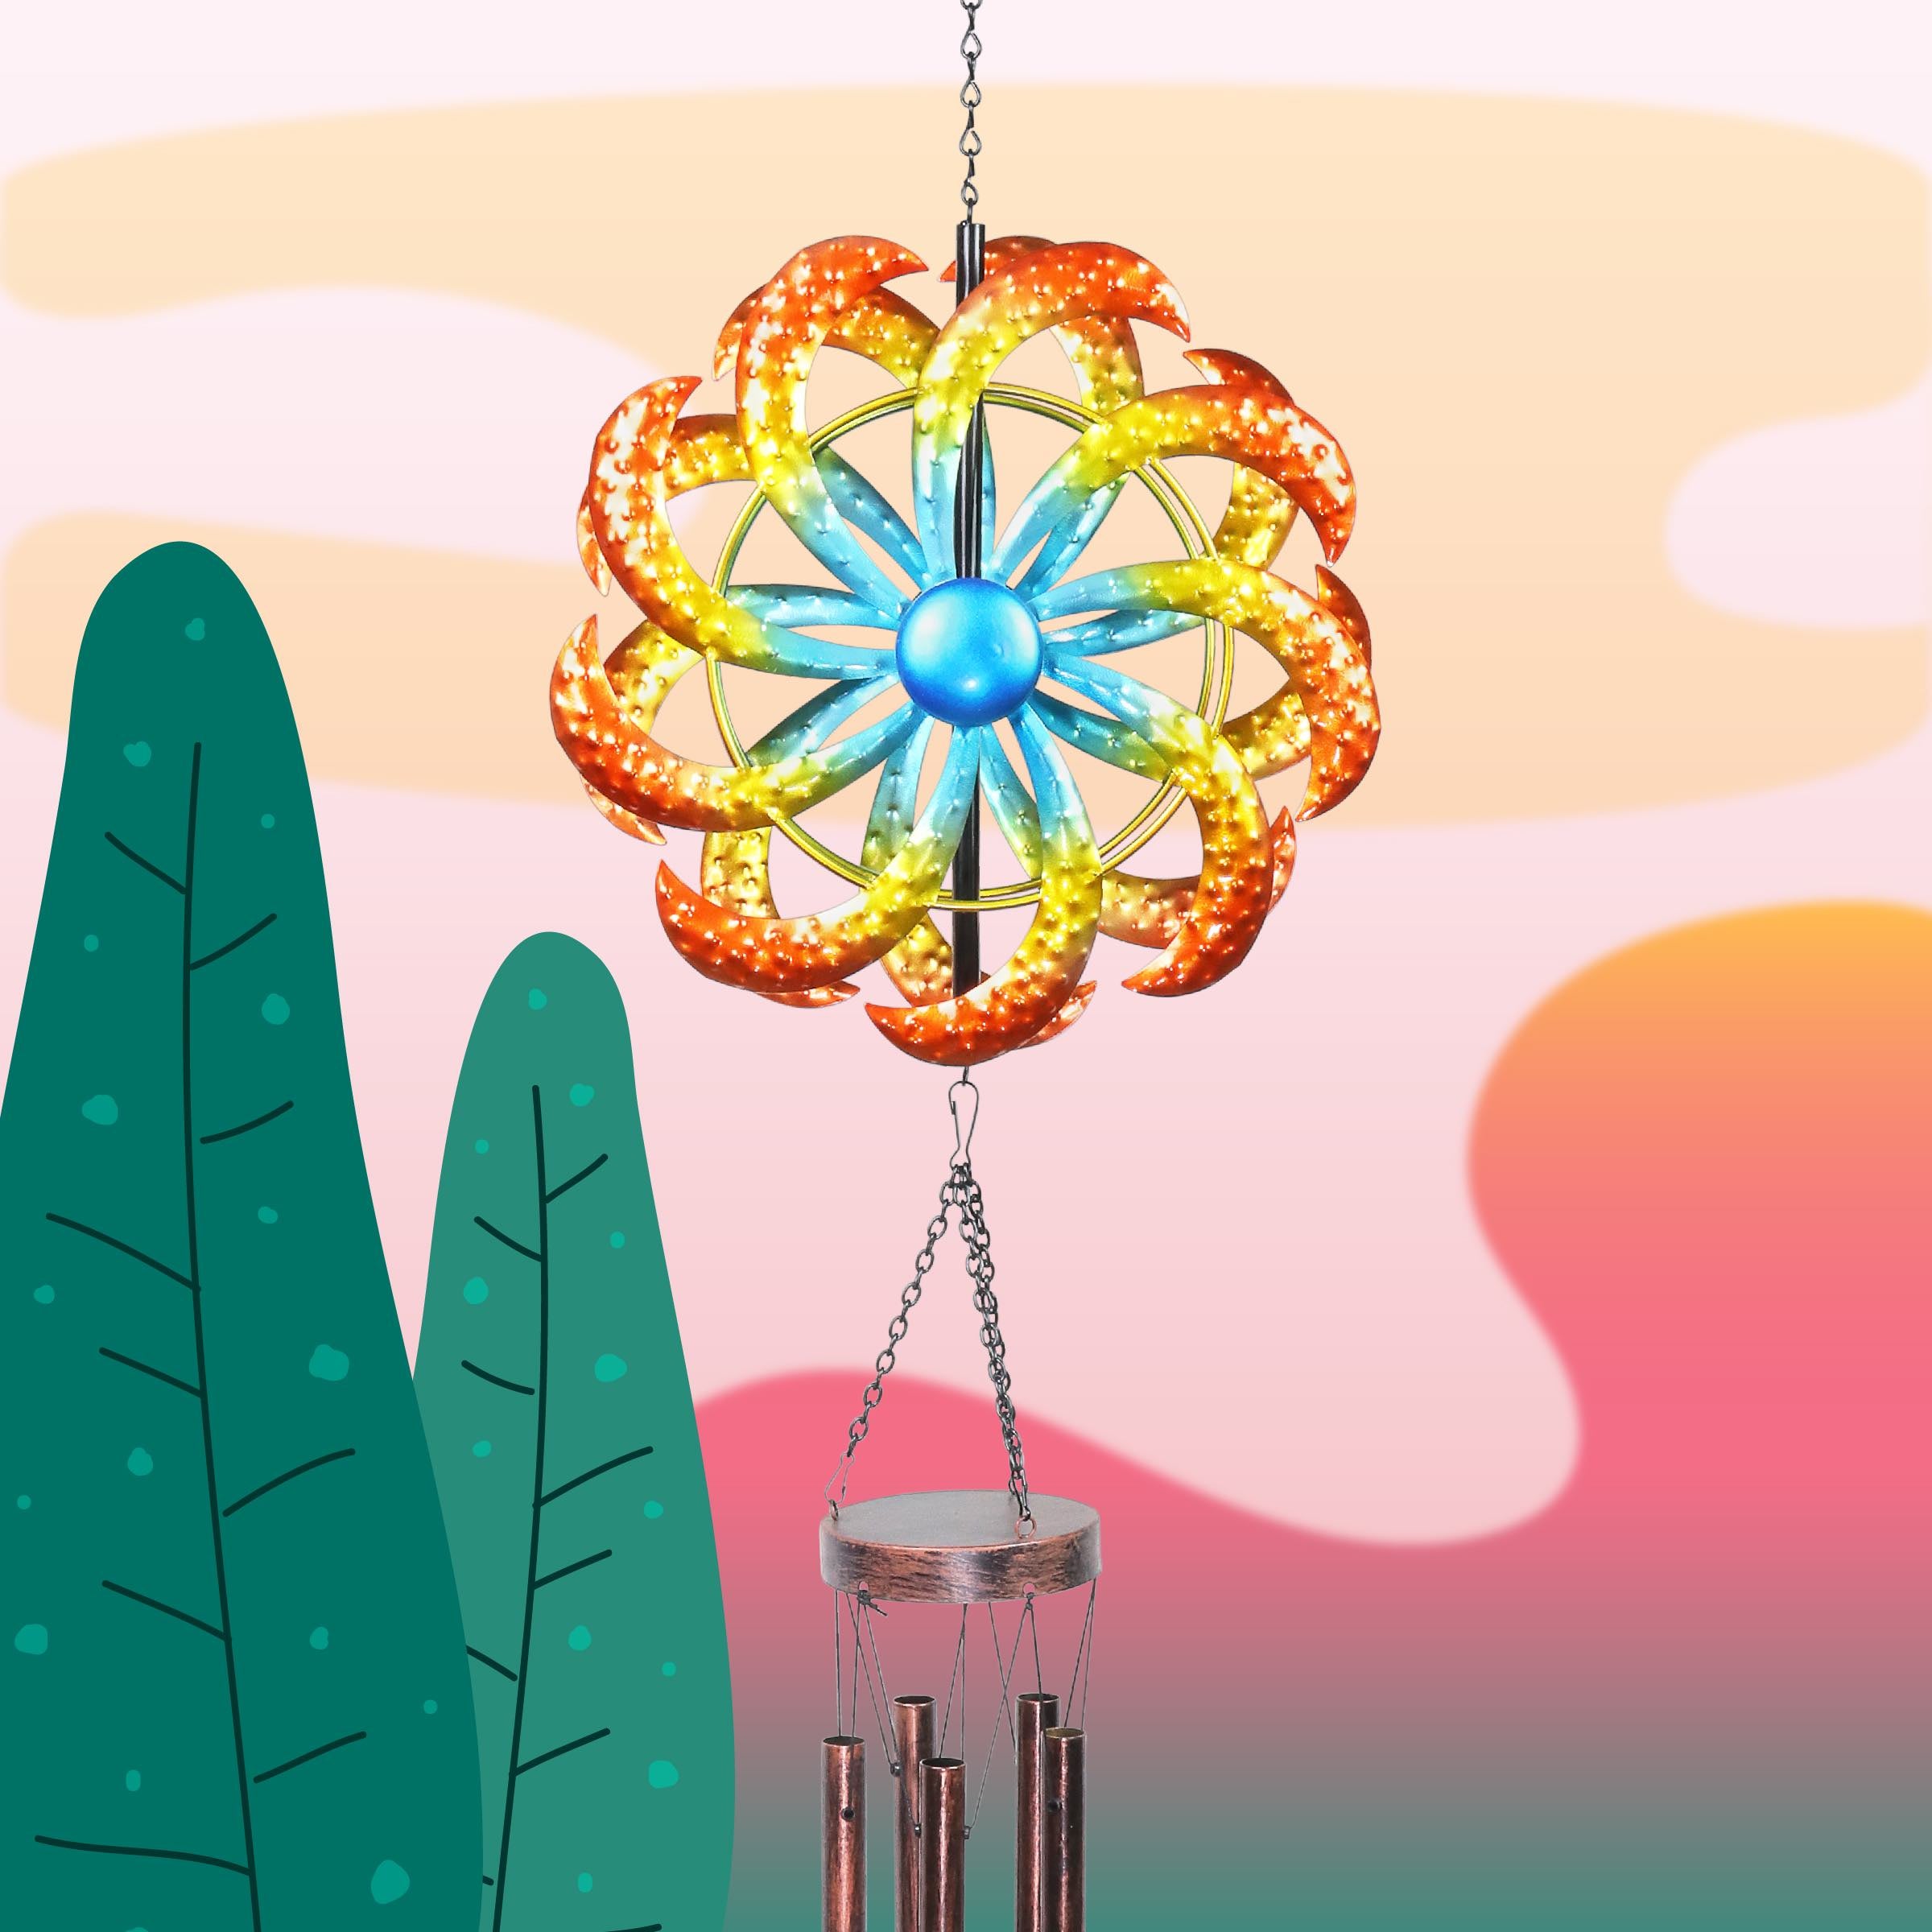 Colorful-Windchimes-for-Mothers-Day.jpg__PID:c4a415ed-5d8d-4b15-b842-3c4bc69638e4